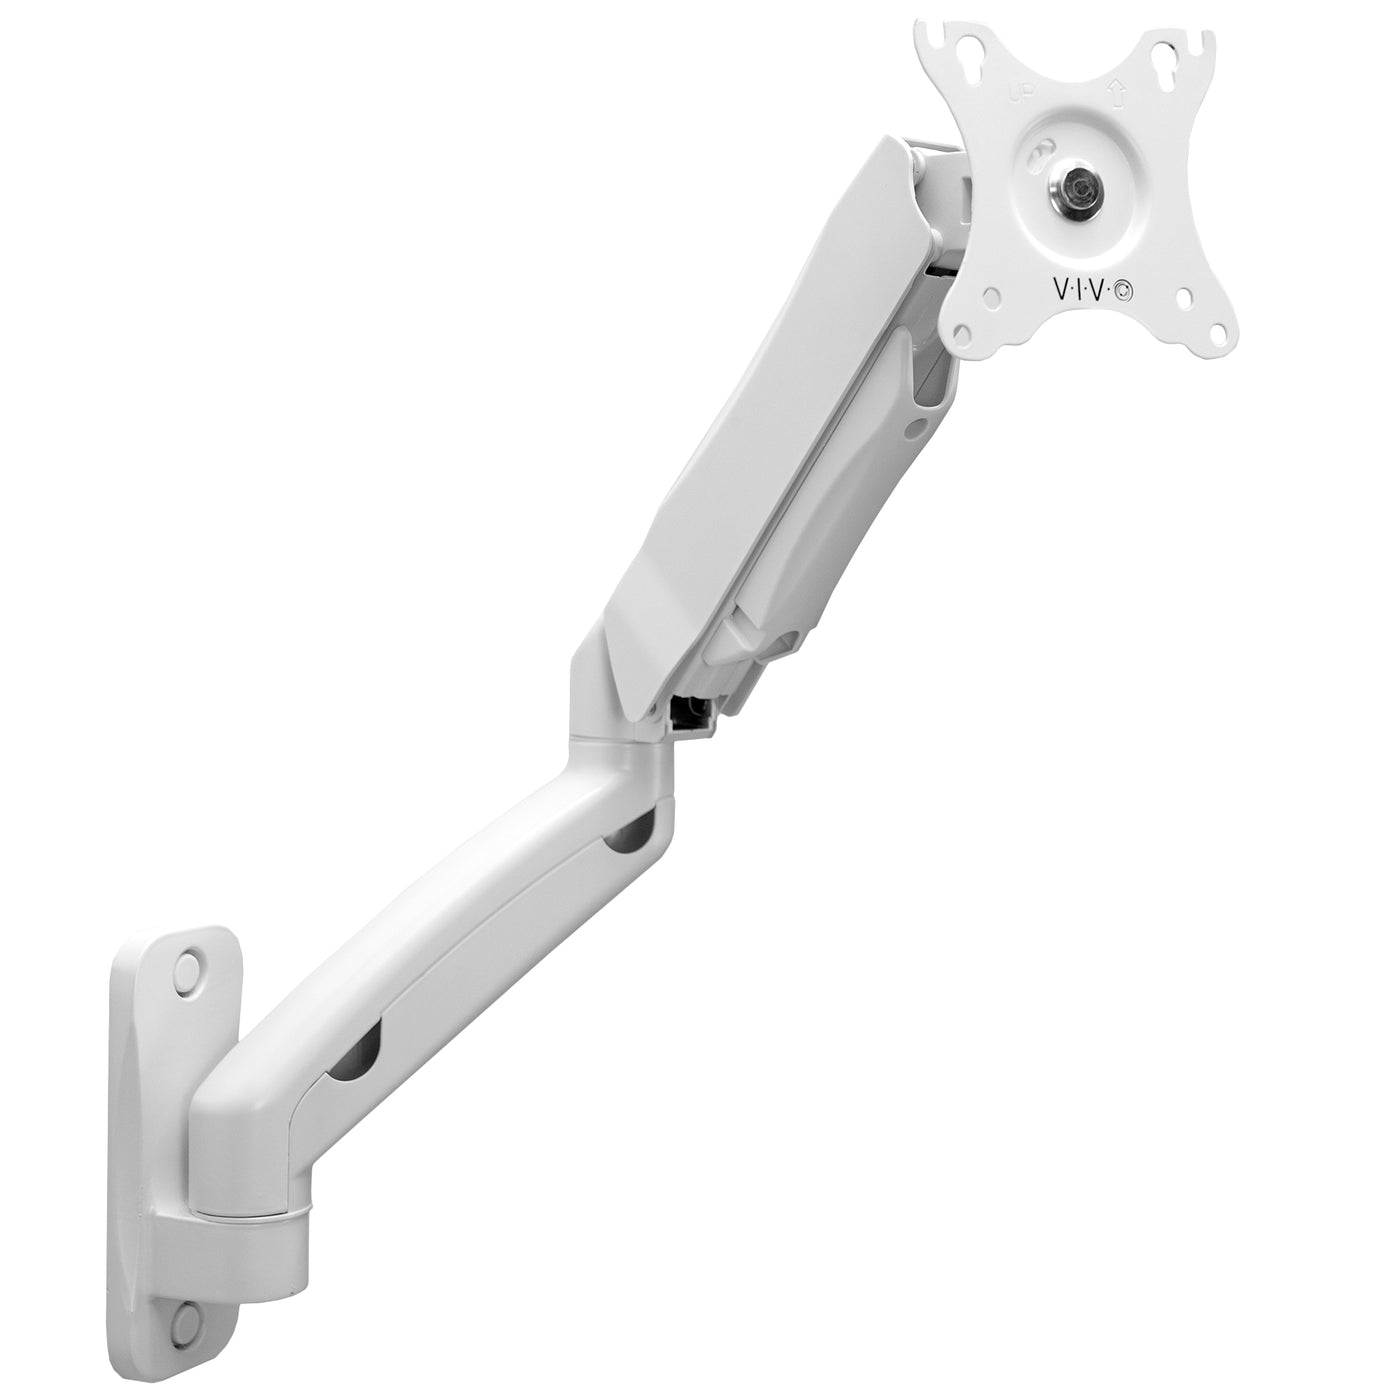 Sturdy adjustable pneumatic arm single monitor ergonomic wall mount for office workstation.